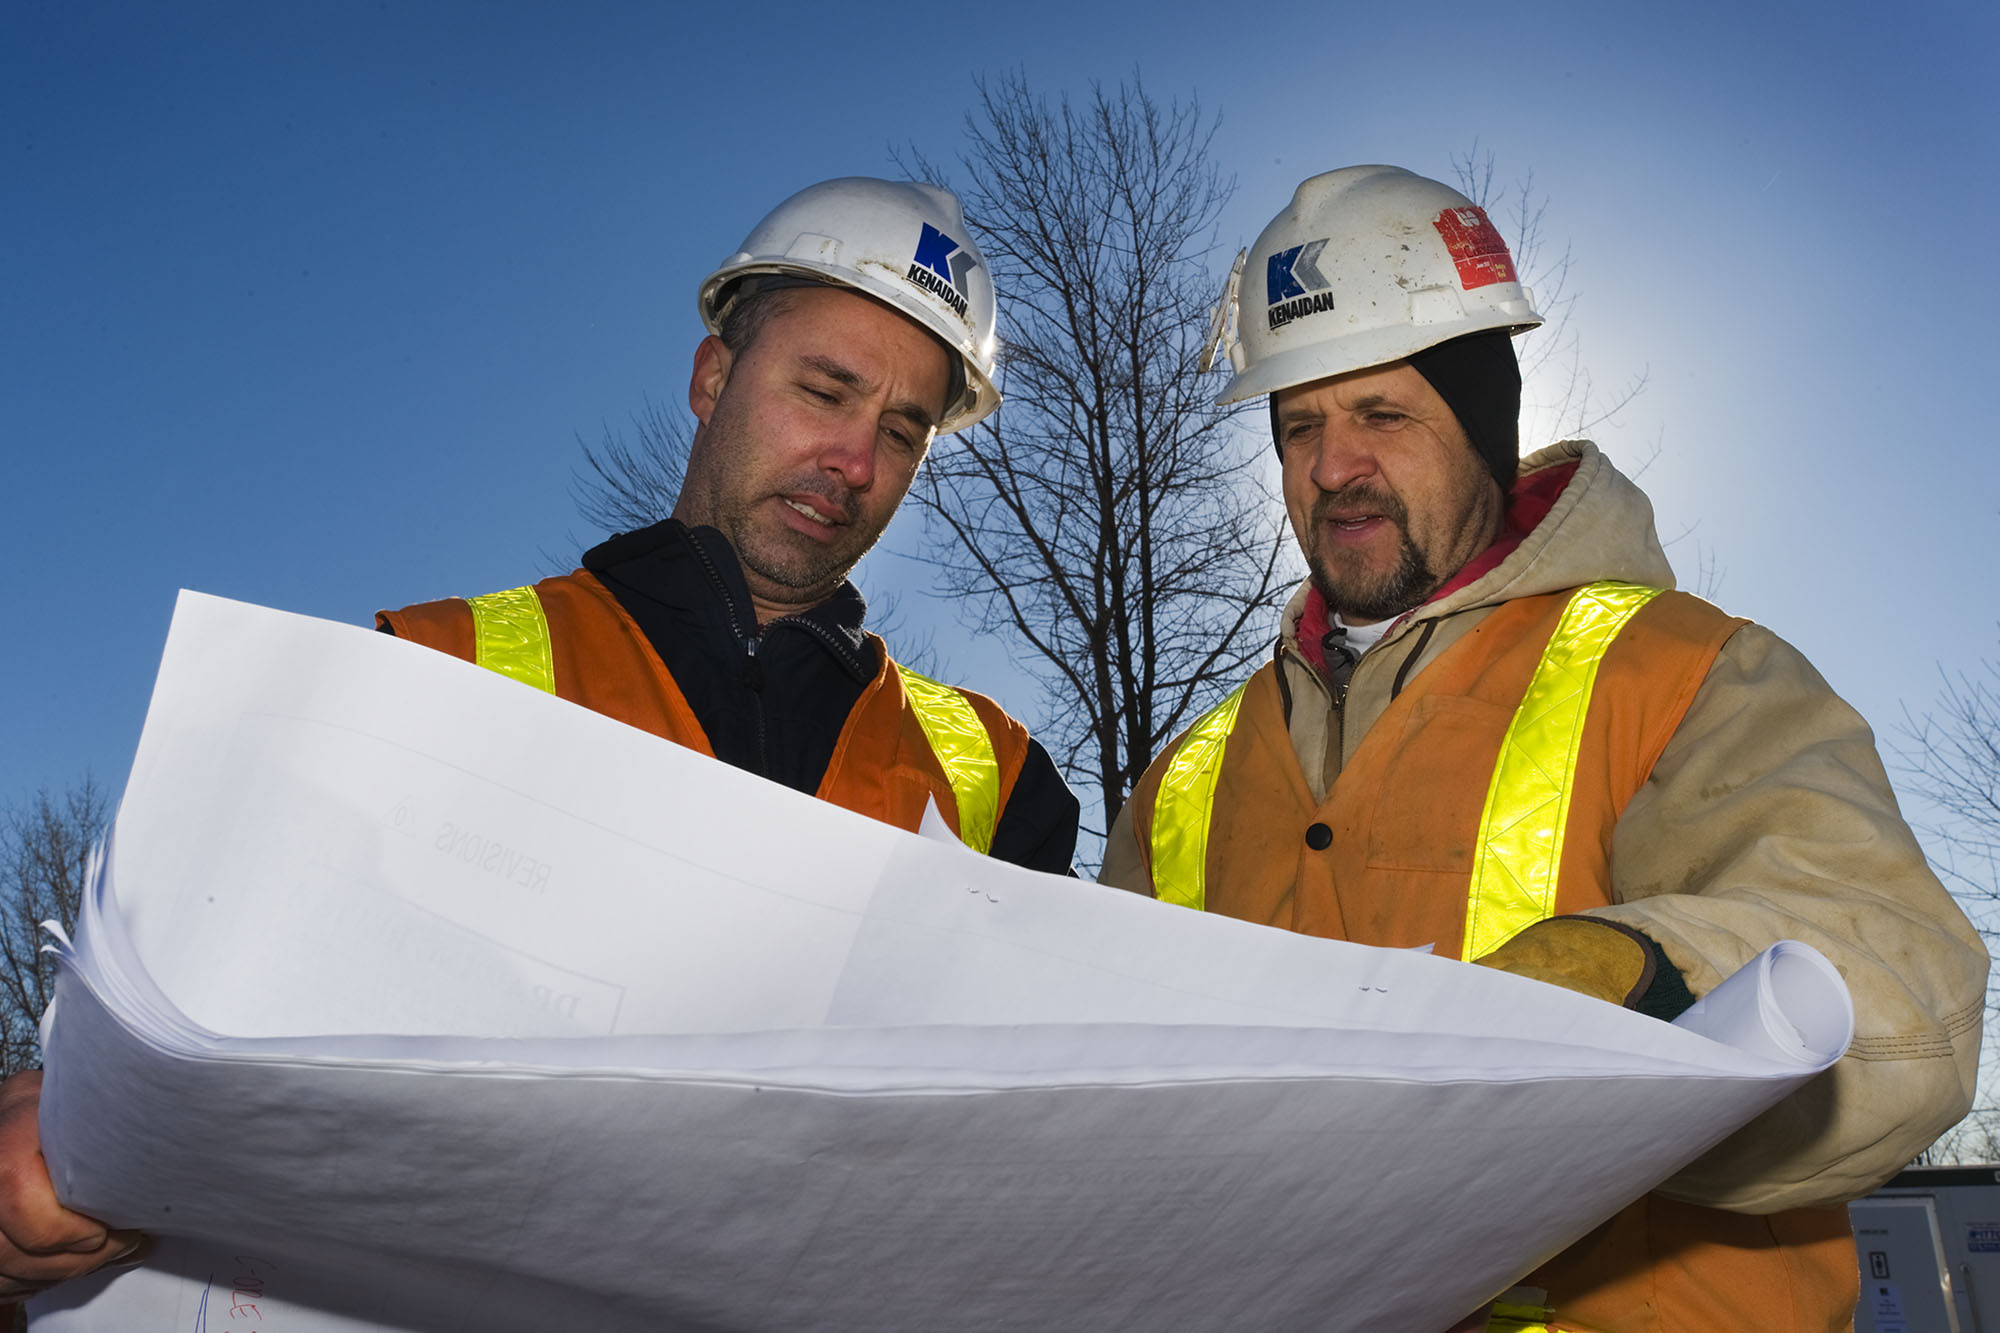 Professional photograph of two construction contractors